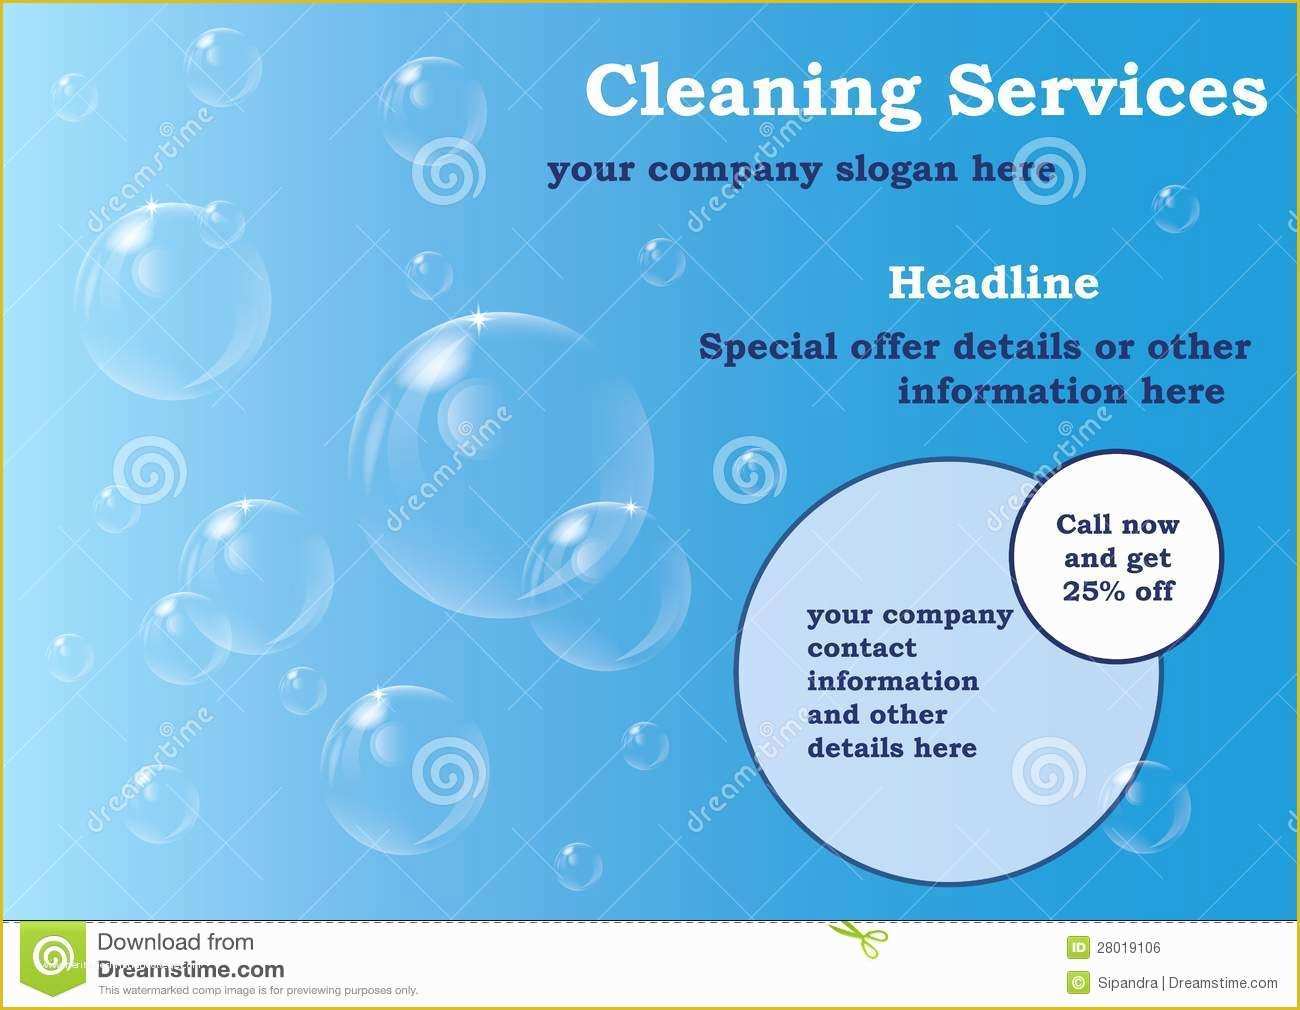 Cleaning Flyers Templates Free Of Cleaning Services Flyers Templates Yourweek 0642ddeca25e